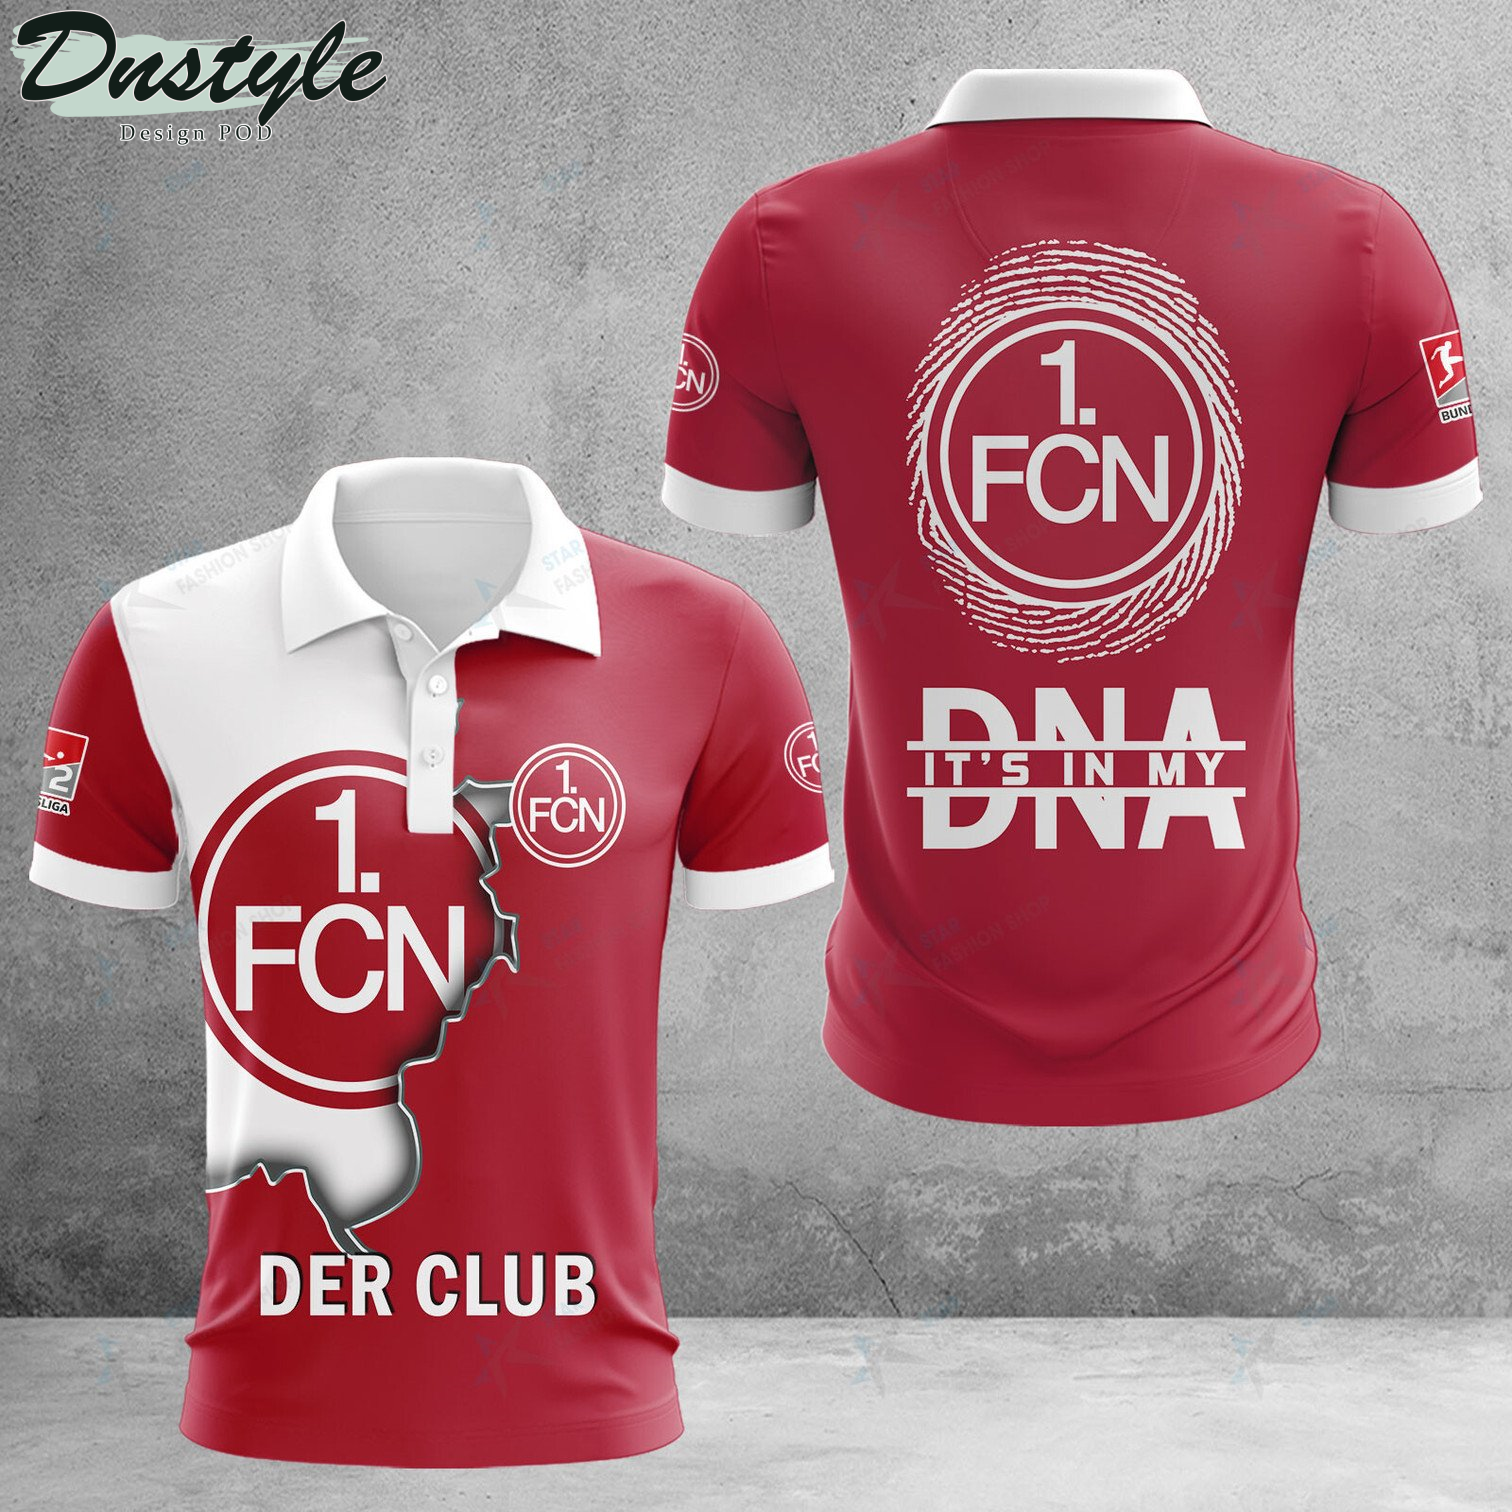 1. FC Nurnberg it’s in my DNA polo shirt